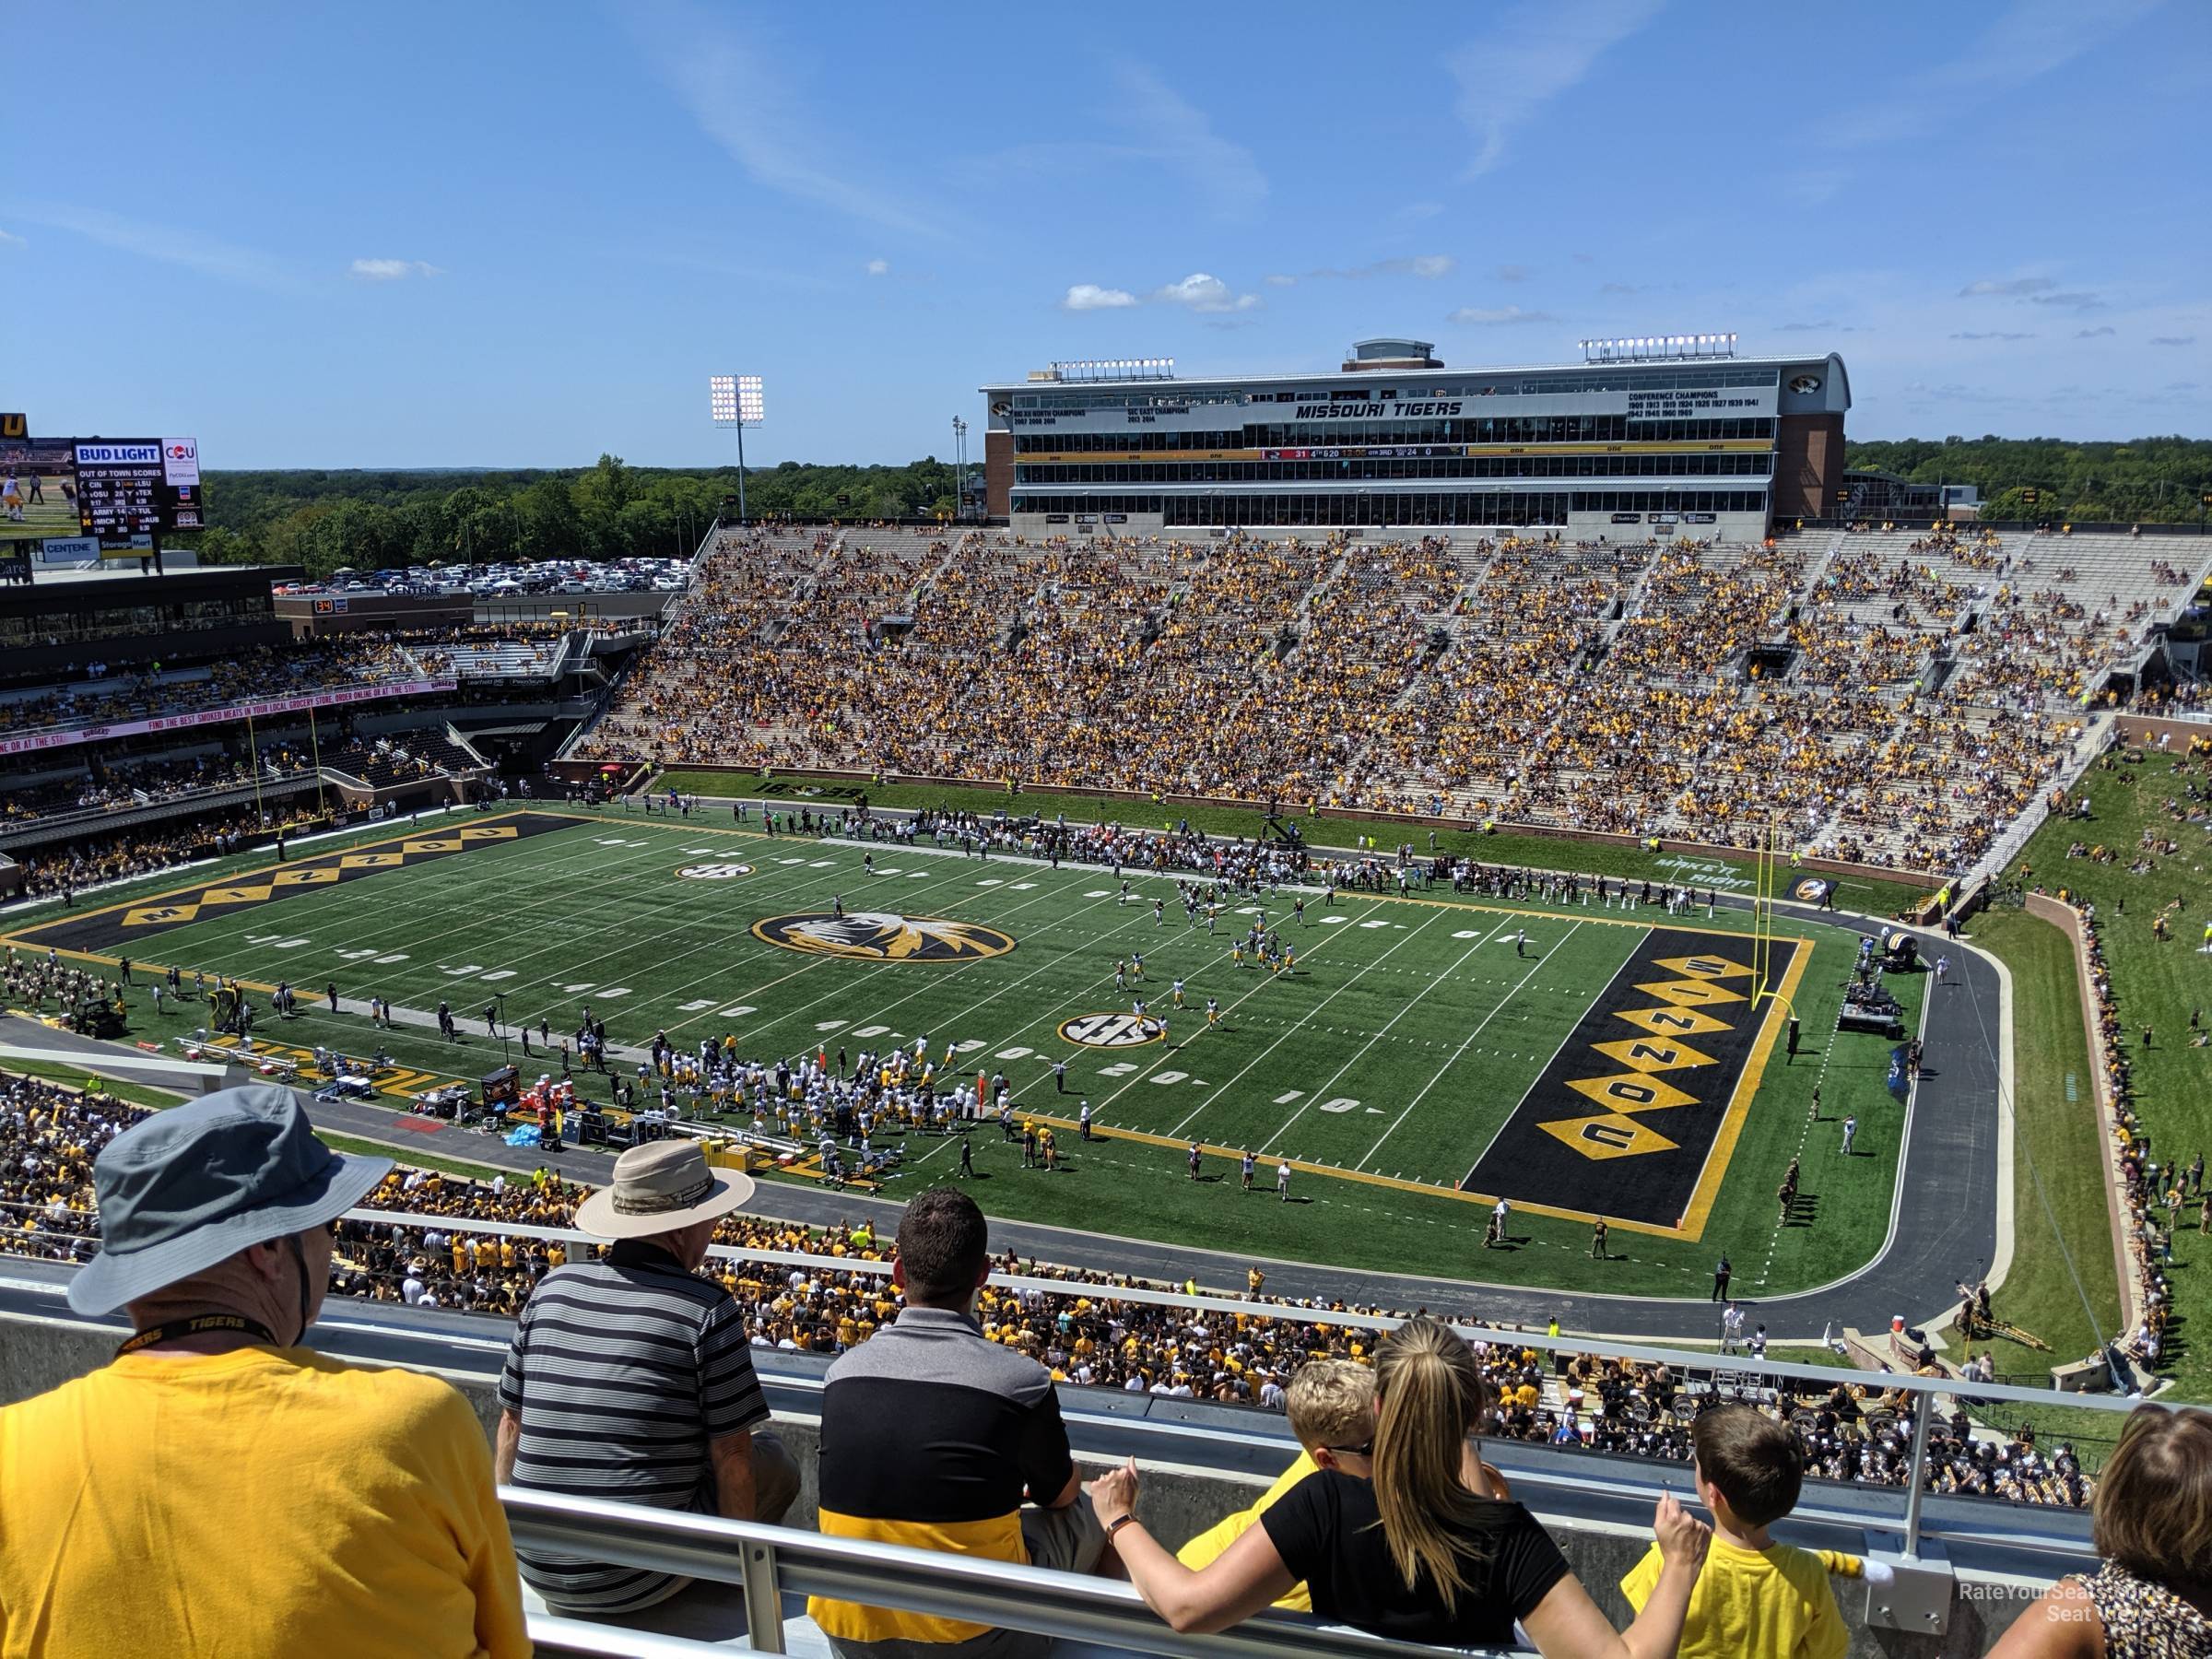 section 314, row 4 seat view  - faurot field